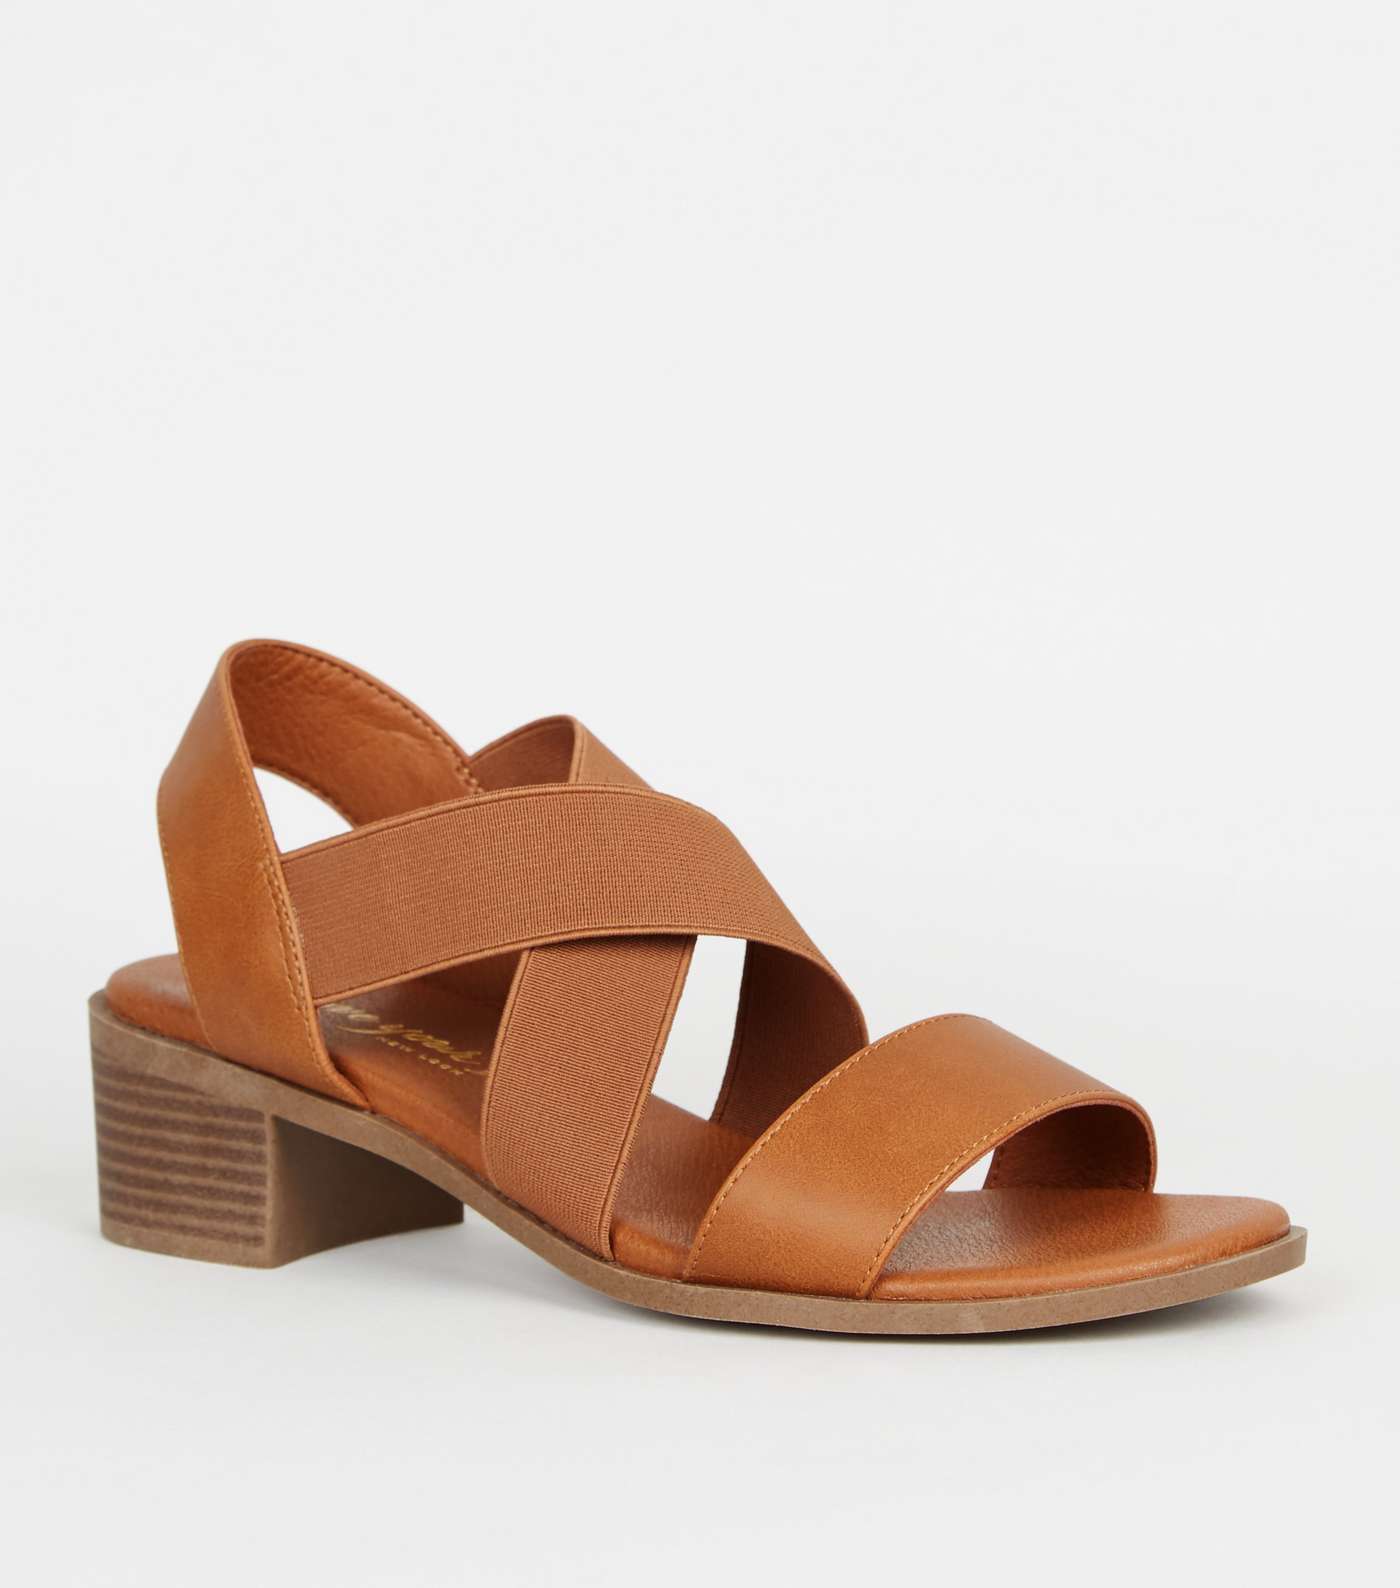 Wide Fit Tan Elastic Strappy Low Heel Sandals